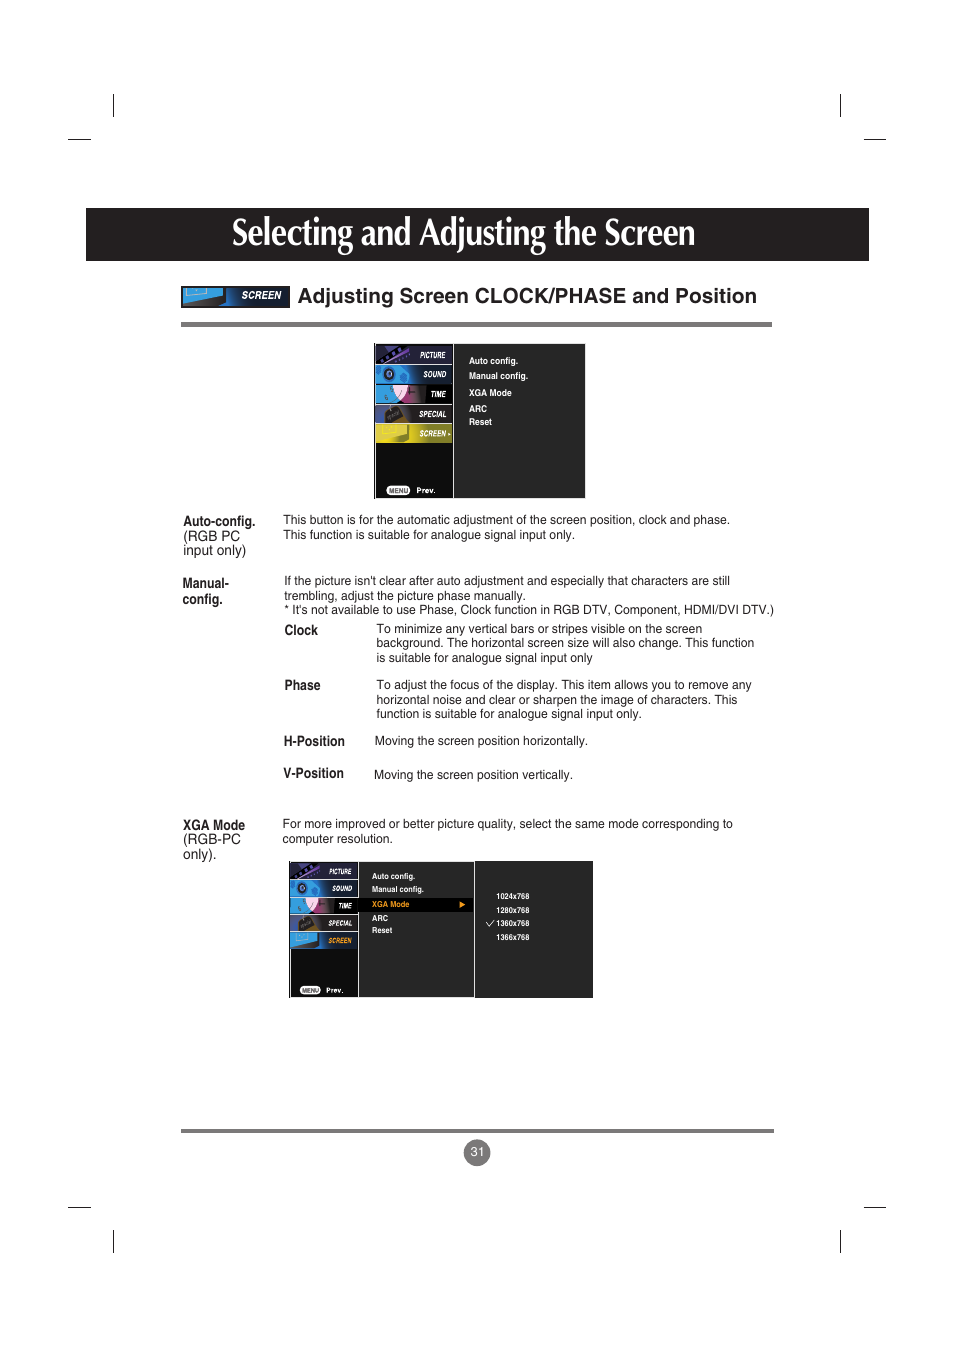 Adjusting screen clock/phase and position, Selecting and adjusting the screen | LG M3701C-BA User Manual | Page 32 / 60